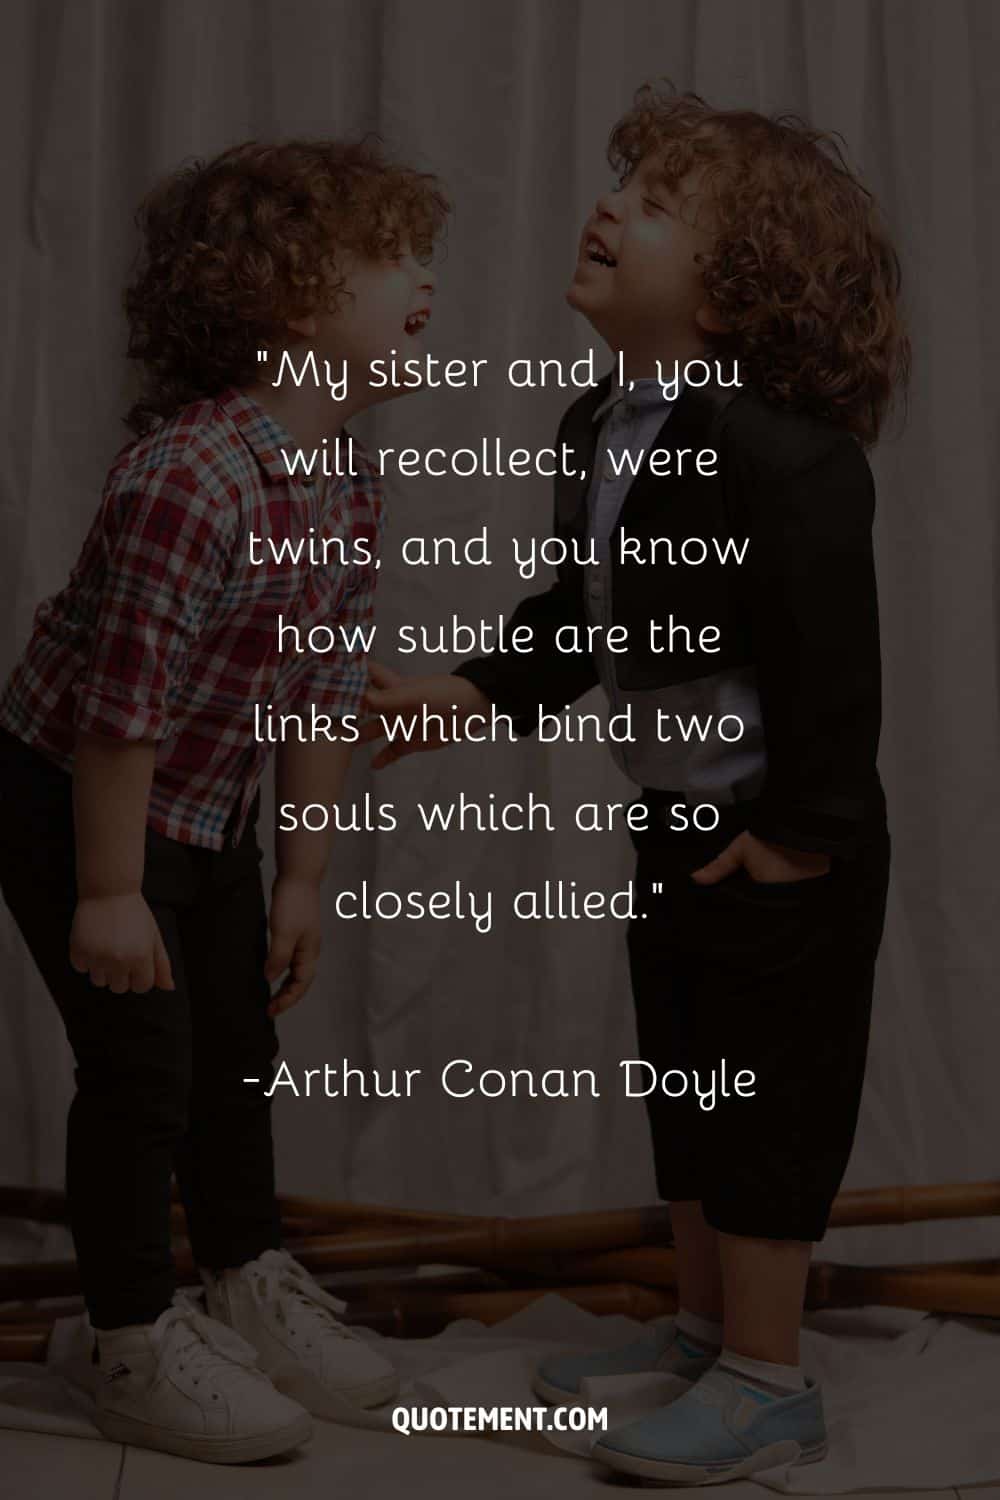 “My sister and I, you will recollect, were twins, and you know how subtle are the links which bind two souls which are so closely allied.” – Arthur Conan Doyle